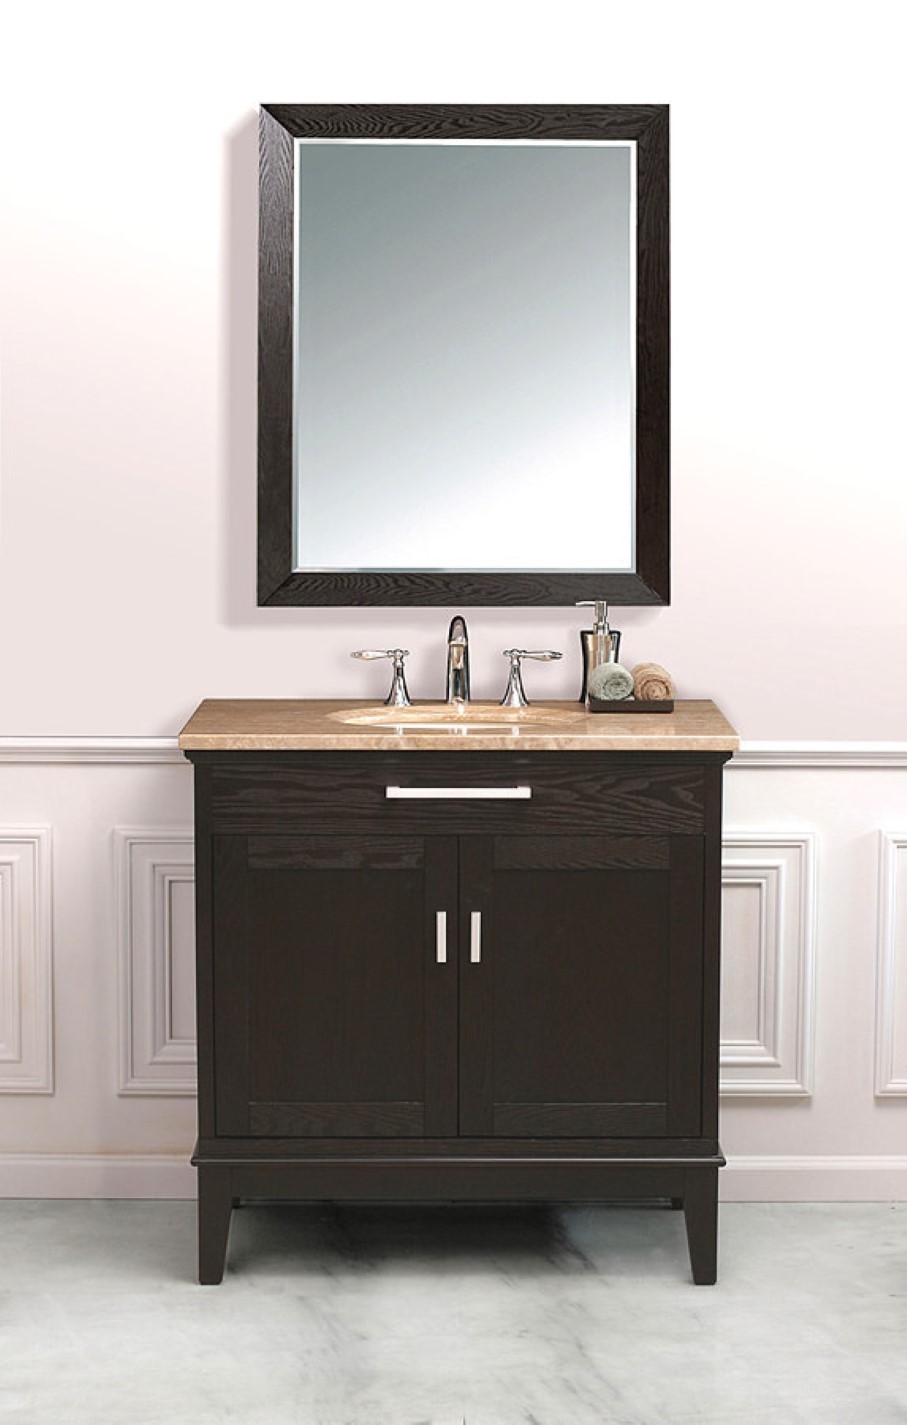 Wainscoting Design Wall Gorgeous Wainscoting Design Feat Blurred Wall Mirror Idea And Compact Black Bathroom Sink Cabinets Bathroom  Taking A Lot Of Benefit From Inspiring Sink Cabinet In Bathroom 